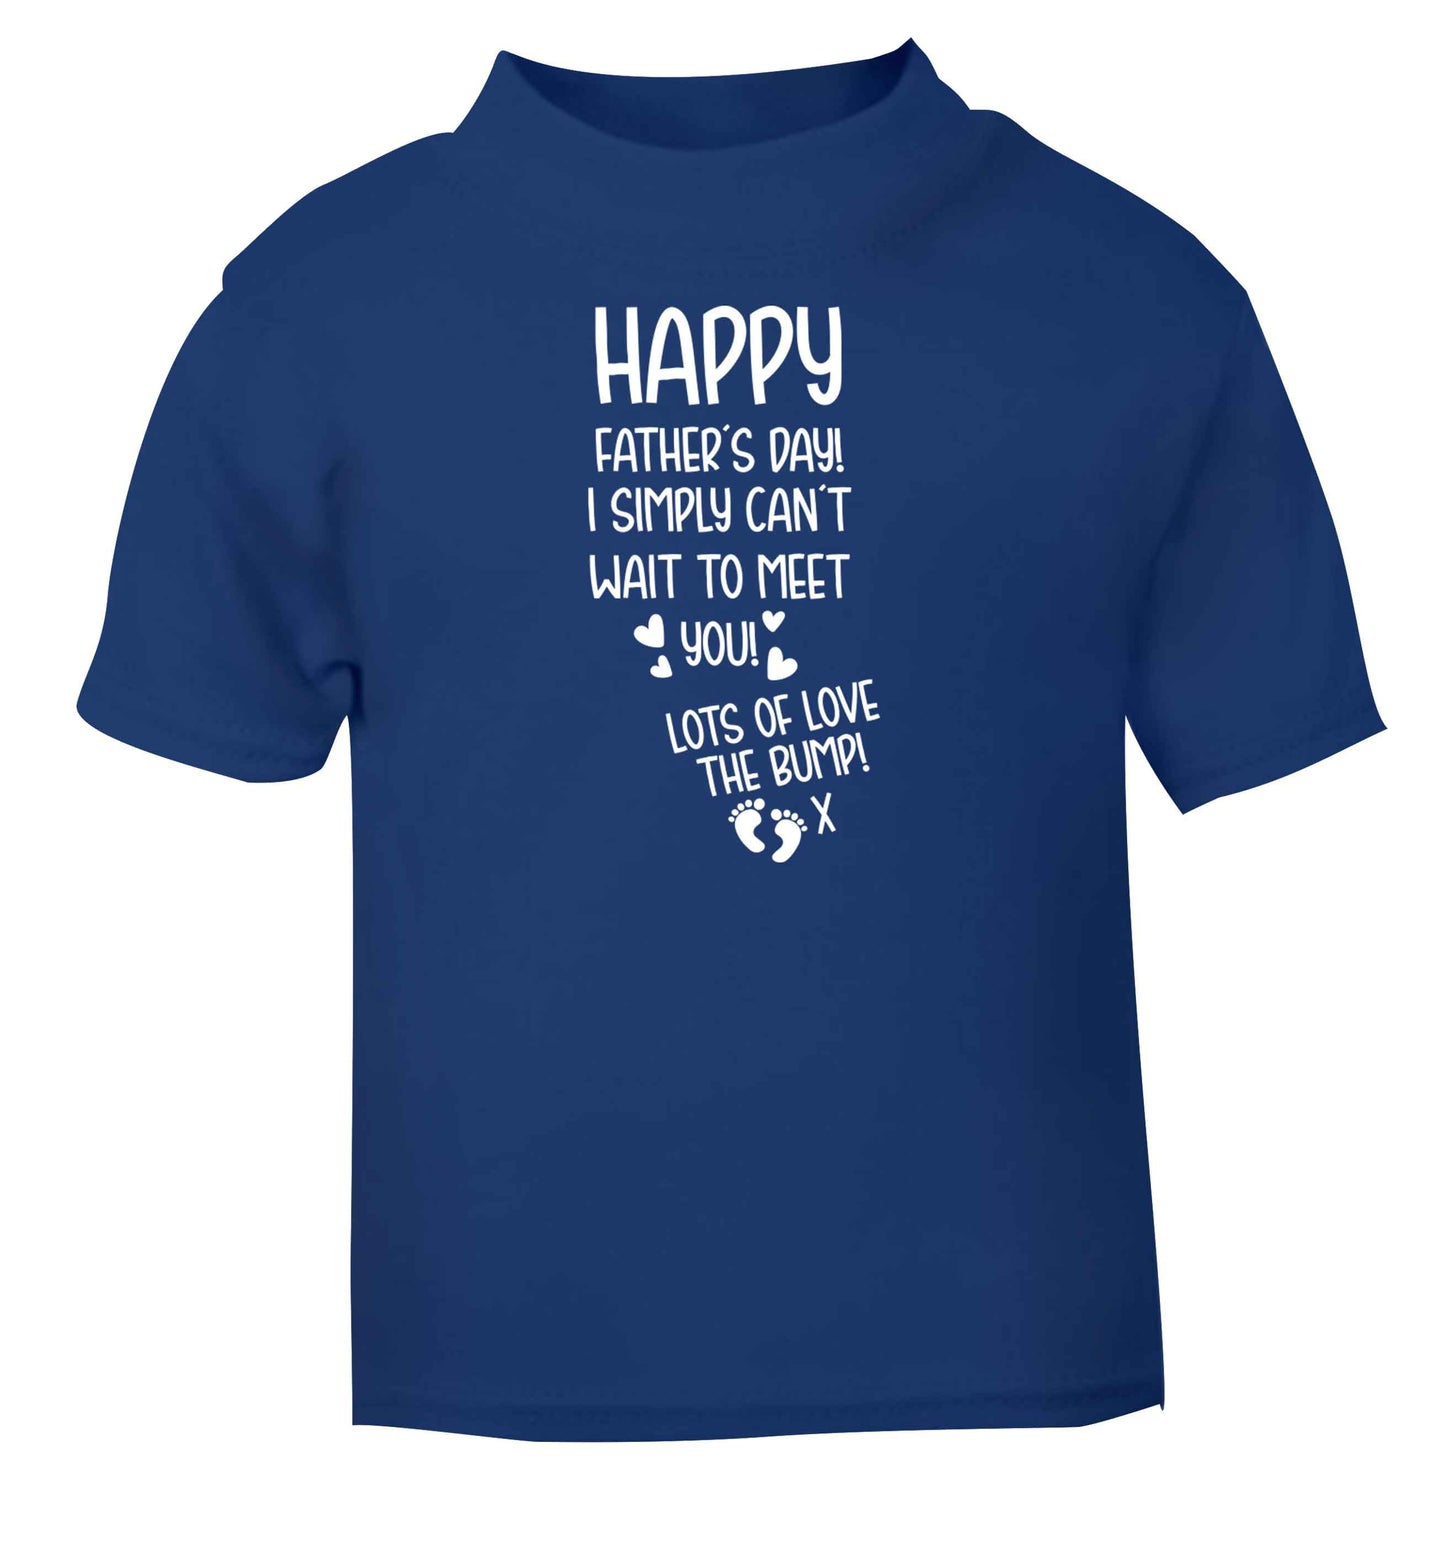 Happy Father's day daddy I can't wait to meet you lot's of love the bump! blue baby toddler Tshirt 2 Years